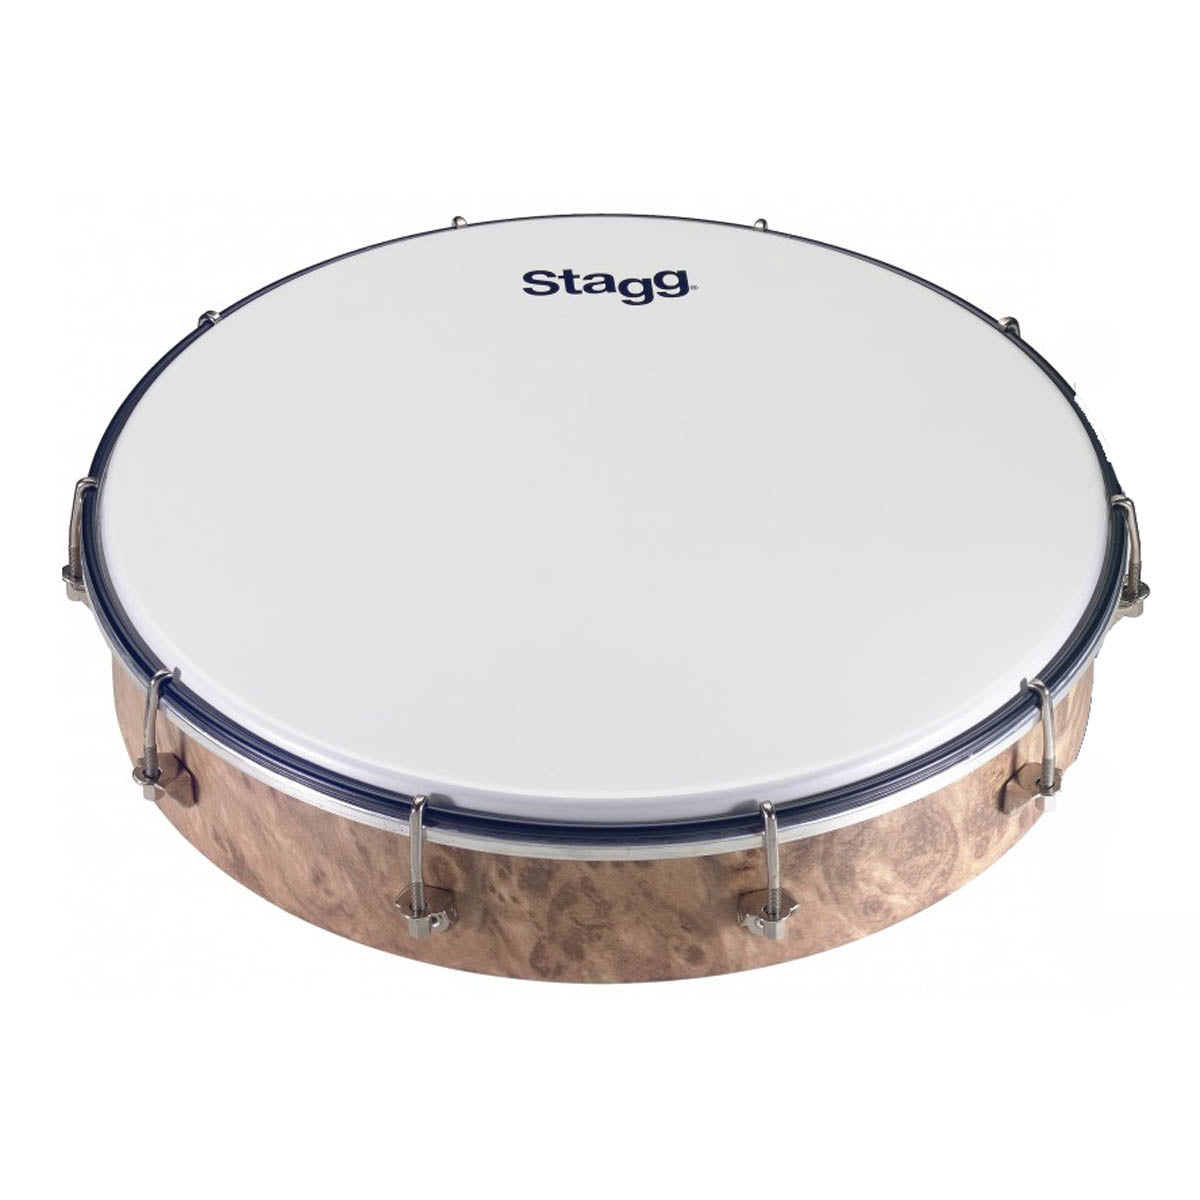 Stagg 12" Tuneable Frame Drum